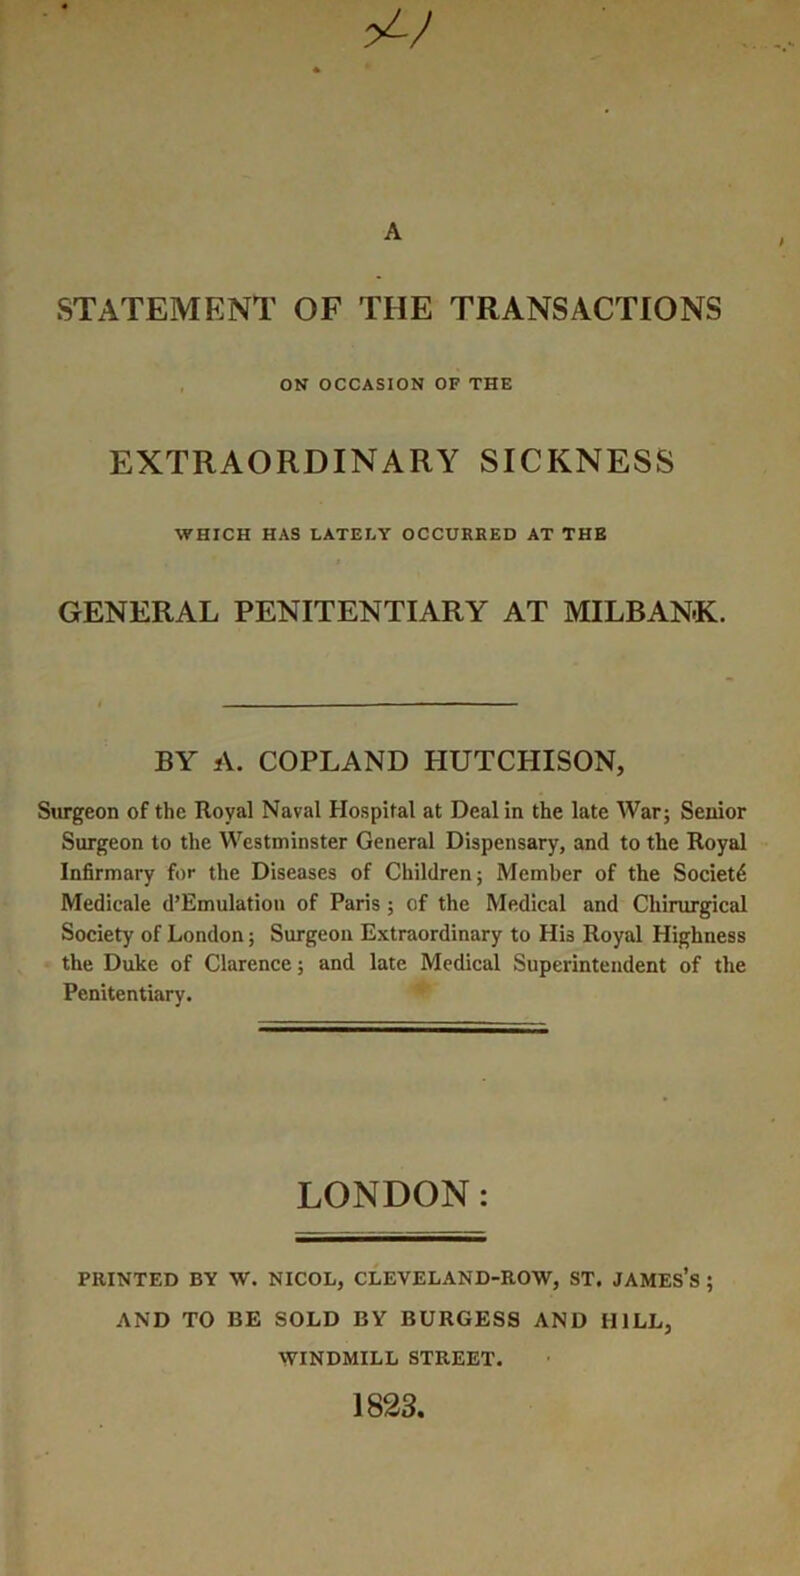 A STATEMENT OF THE TRANSACTIONS , ON OCCASION OF THE EXTRAORDINARY SICKNESS WHICH HAS LATELY OCCURRED AT THE GENERAL PENITENTIARY AT MILBANK. BY A. COPLAND HUTCHISON, Surgeon of the Royal Naval Hospital at Deal in the late War; Senior Surgeon to the Westminster General Dispensary, and to the Royal Infirmary for the Diseases of Children; Member of the Society Medicale d’Emulatioii of Paris ; of the Medical and Chirurgical Society of London; Surgeon Extraordinary to His Royal Highness the Duke of Clarence; and late Medical Superintendent of the Penitentiary. LONDON: PRINTED BY W. NICOL, CLEVELAND-ROW, ST. JAMES’s ; AND TO BE SOLD BY BURGESS AND HILL, WINDMILL STREET. 1823,